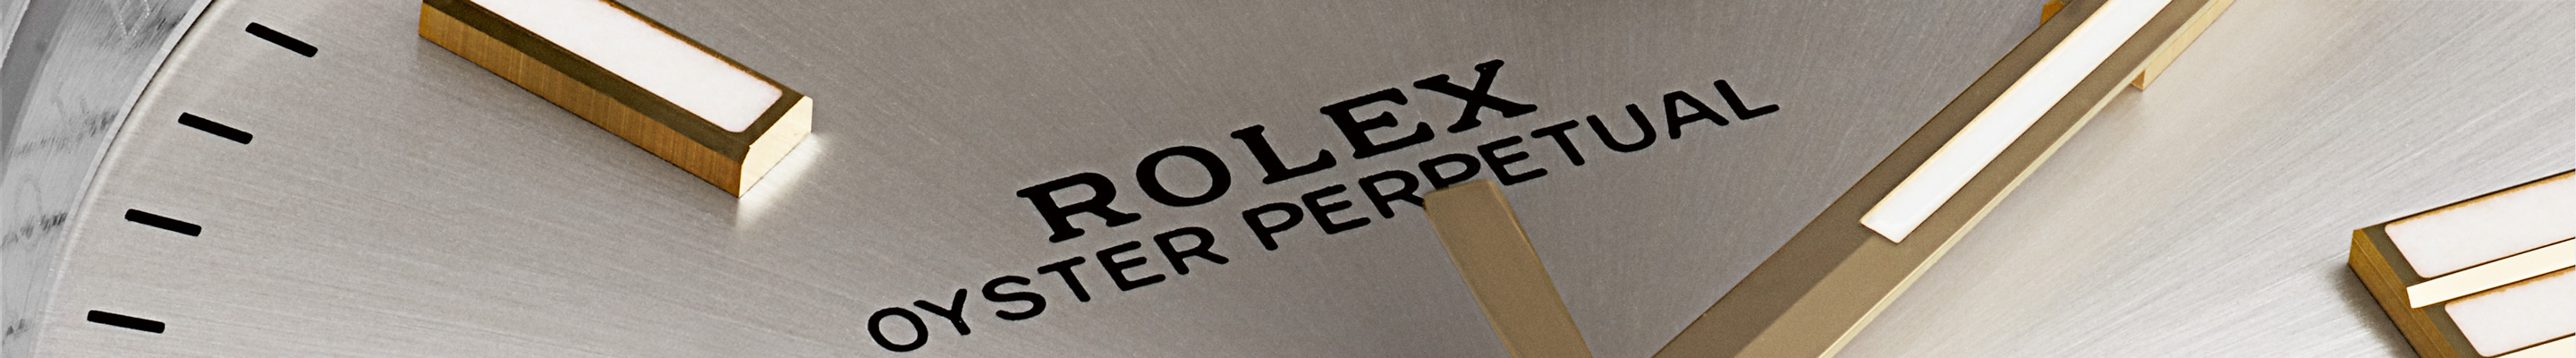 Close up of Rolex Oyster Perpetual watch dial logo